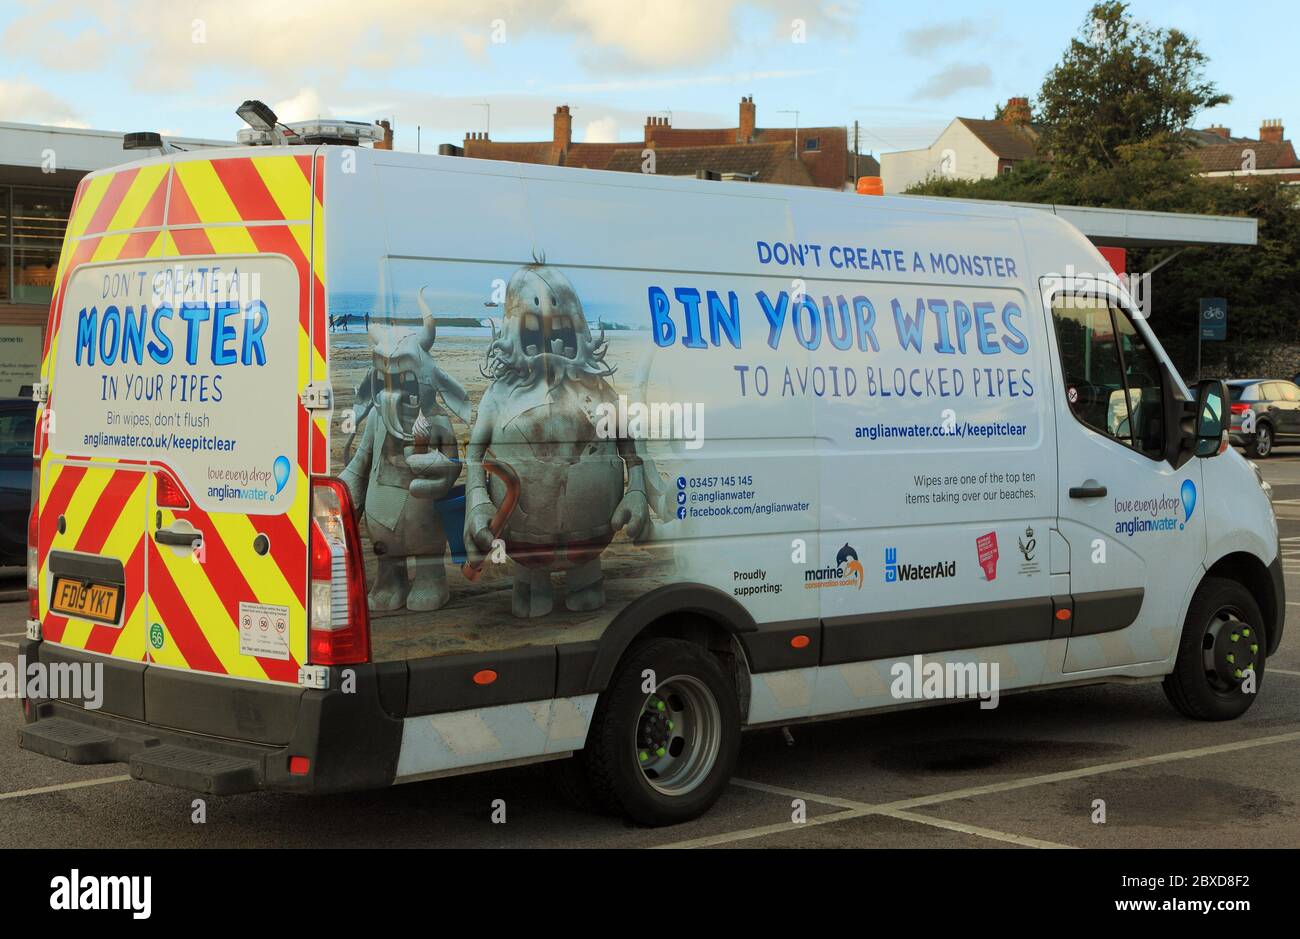 Anglian Water, van, vehicle, water company, Bin Your Wipes, Don't Create A Monster, Norfolk, England Stock Photo